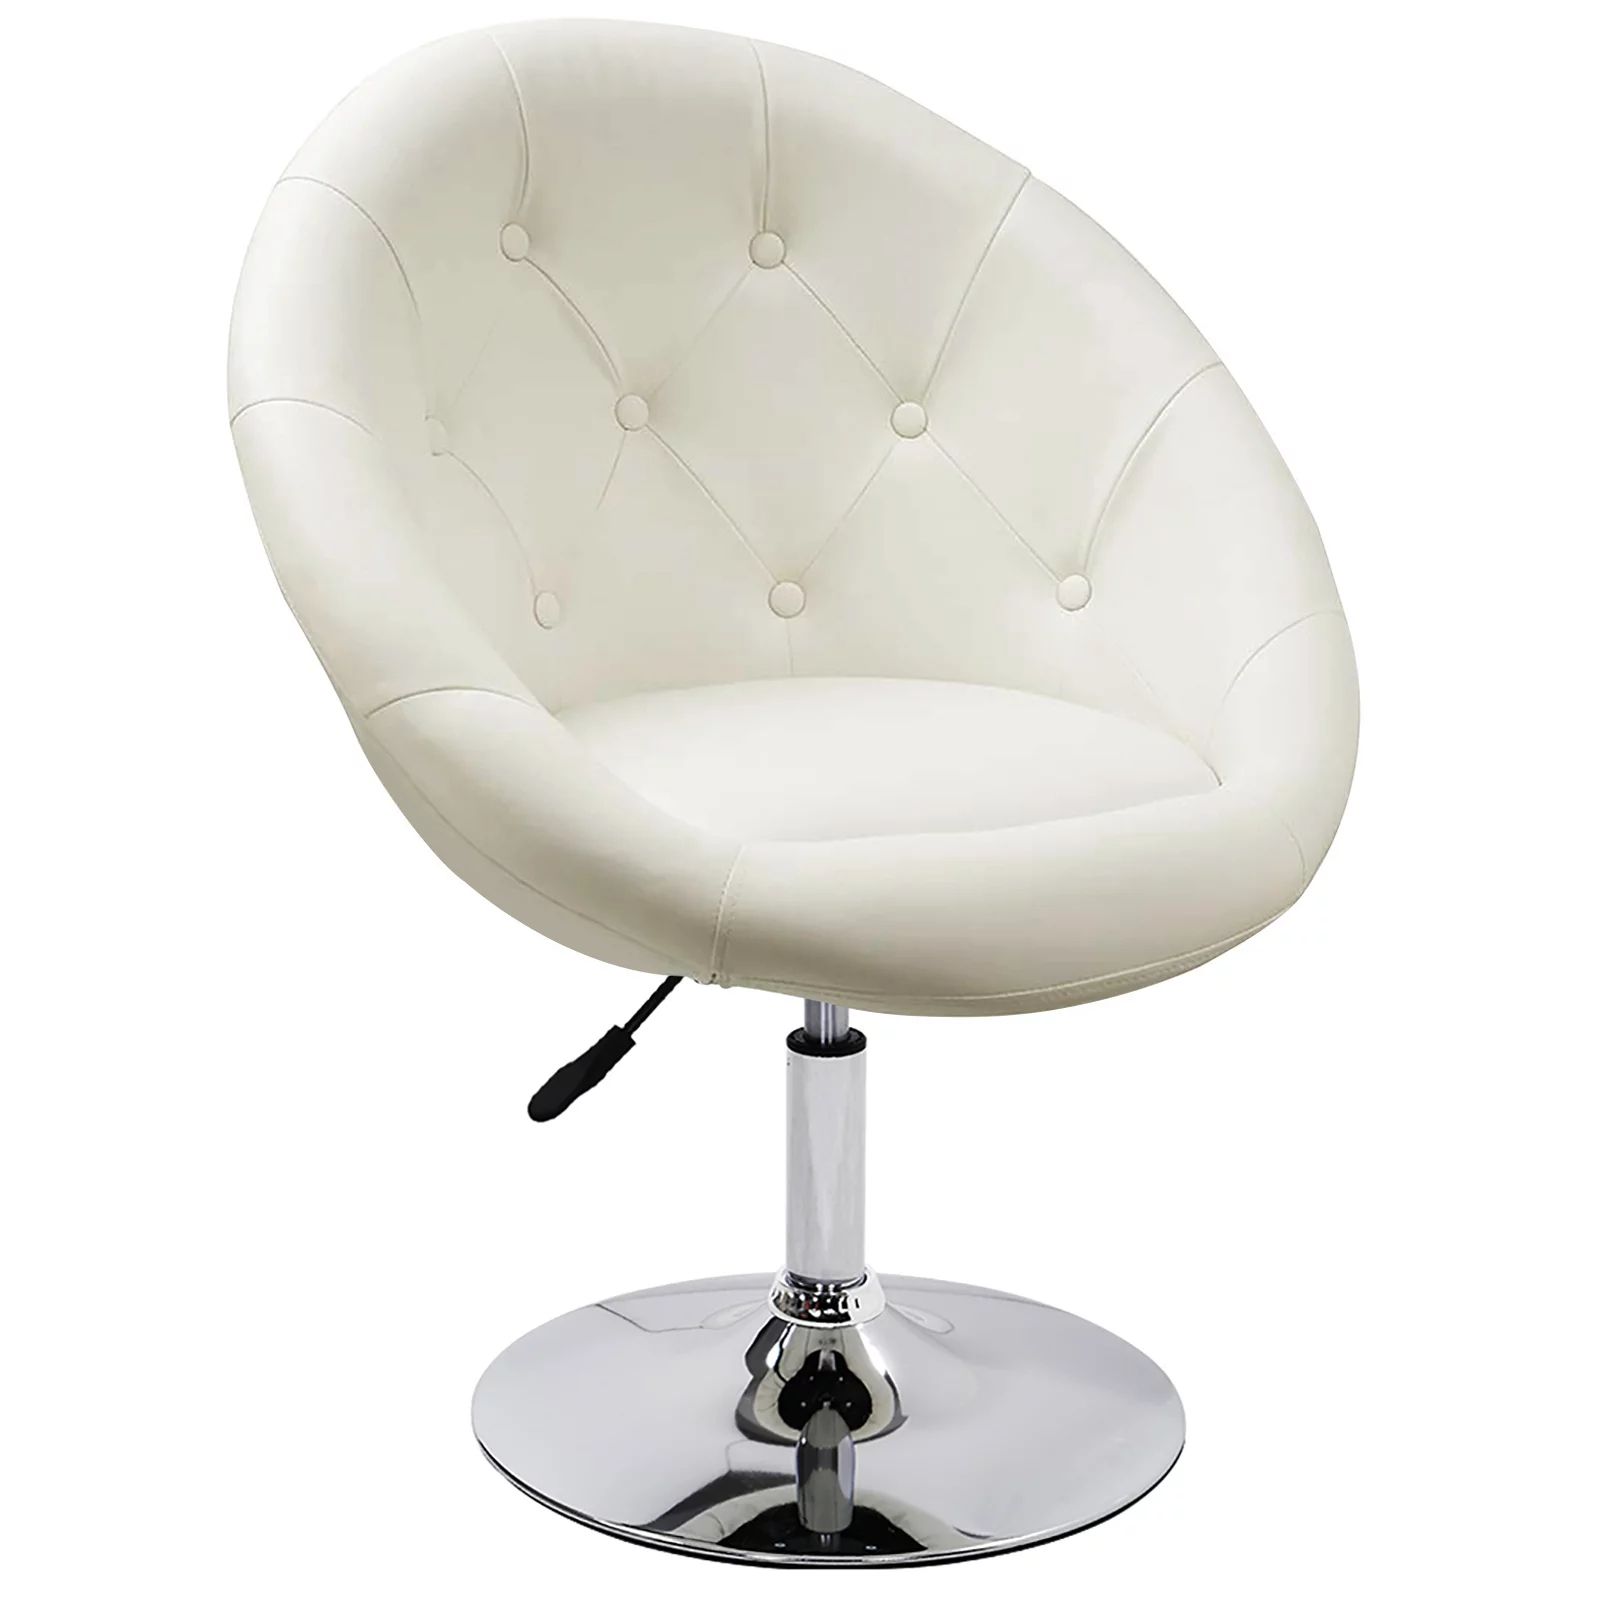 Duhome Vanity Make Up Accent Chair Luxury Pu Leather Contemporary Round Pertaining To White And Clear Acrylic Tufted Vanity Stools (View 6 of 20)